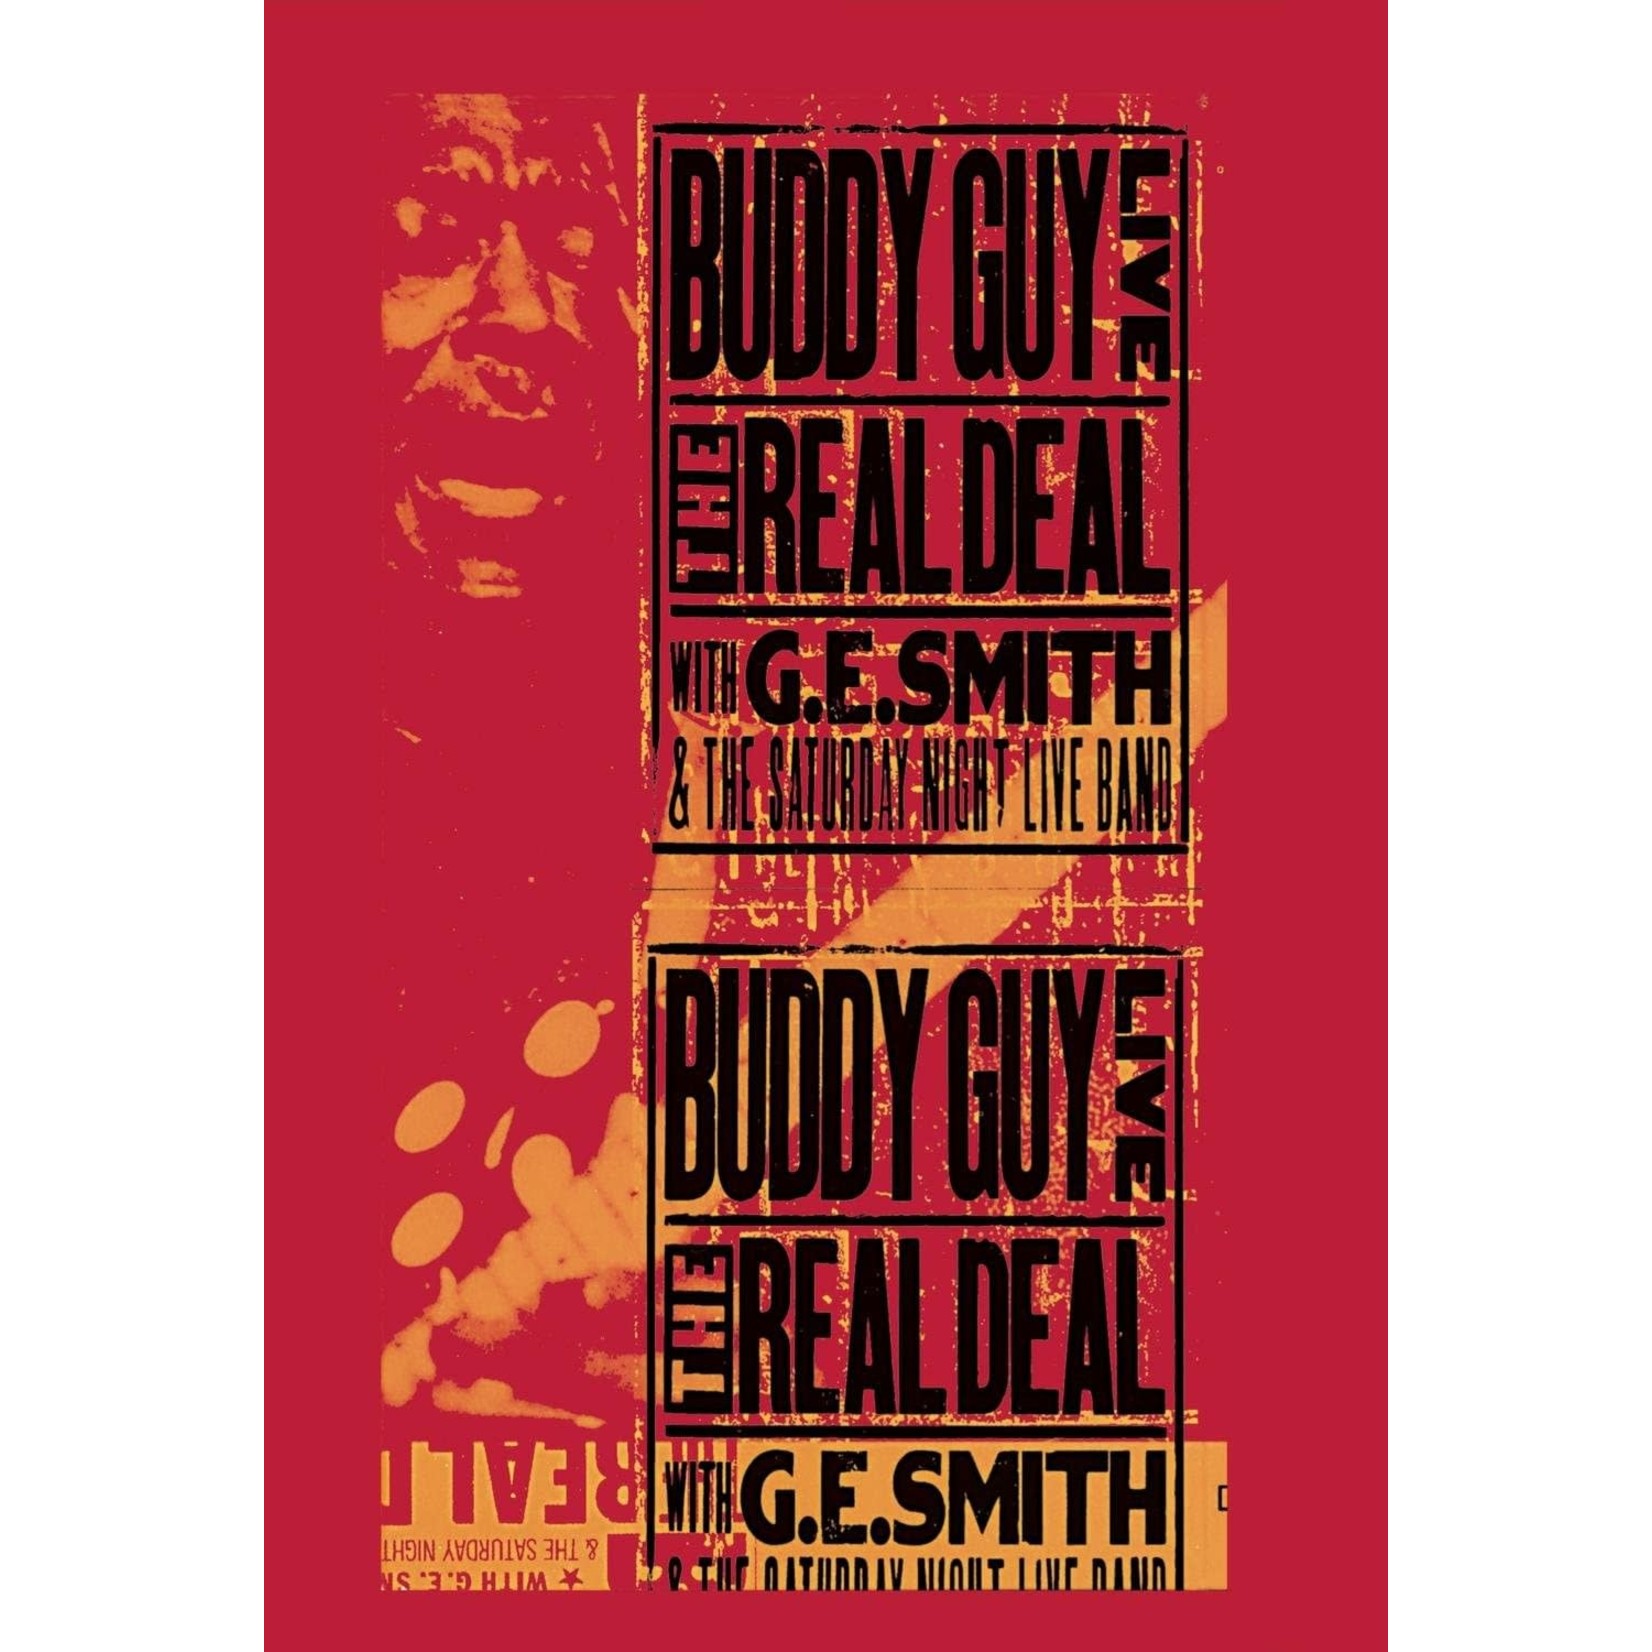 Buddy Guy - Live: The Real Deal [USED DVD]